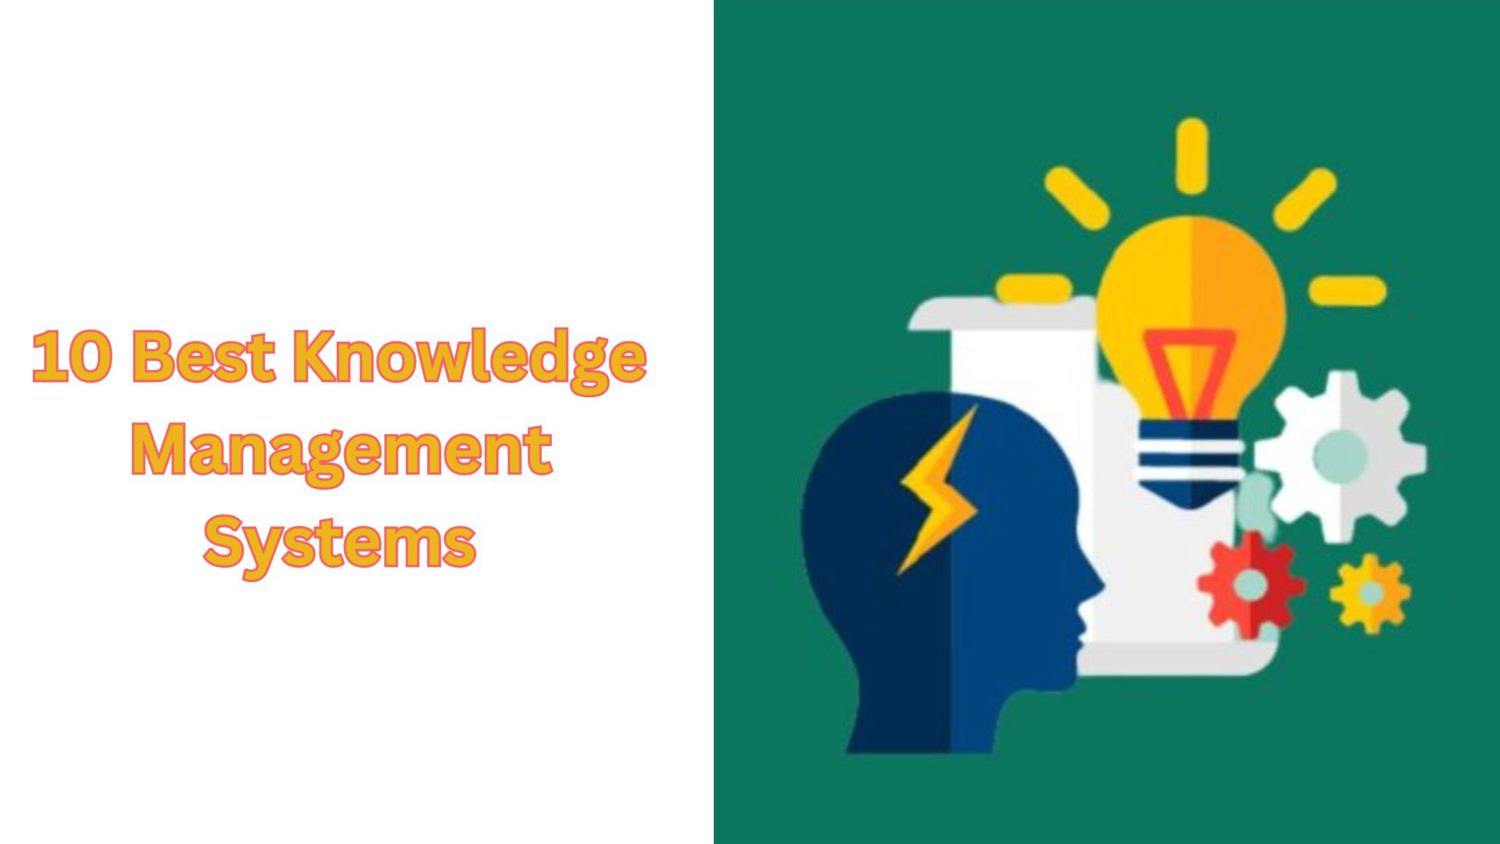 10 Best Knowledge Management Systems